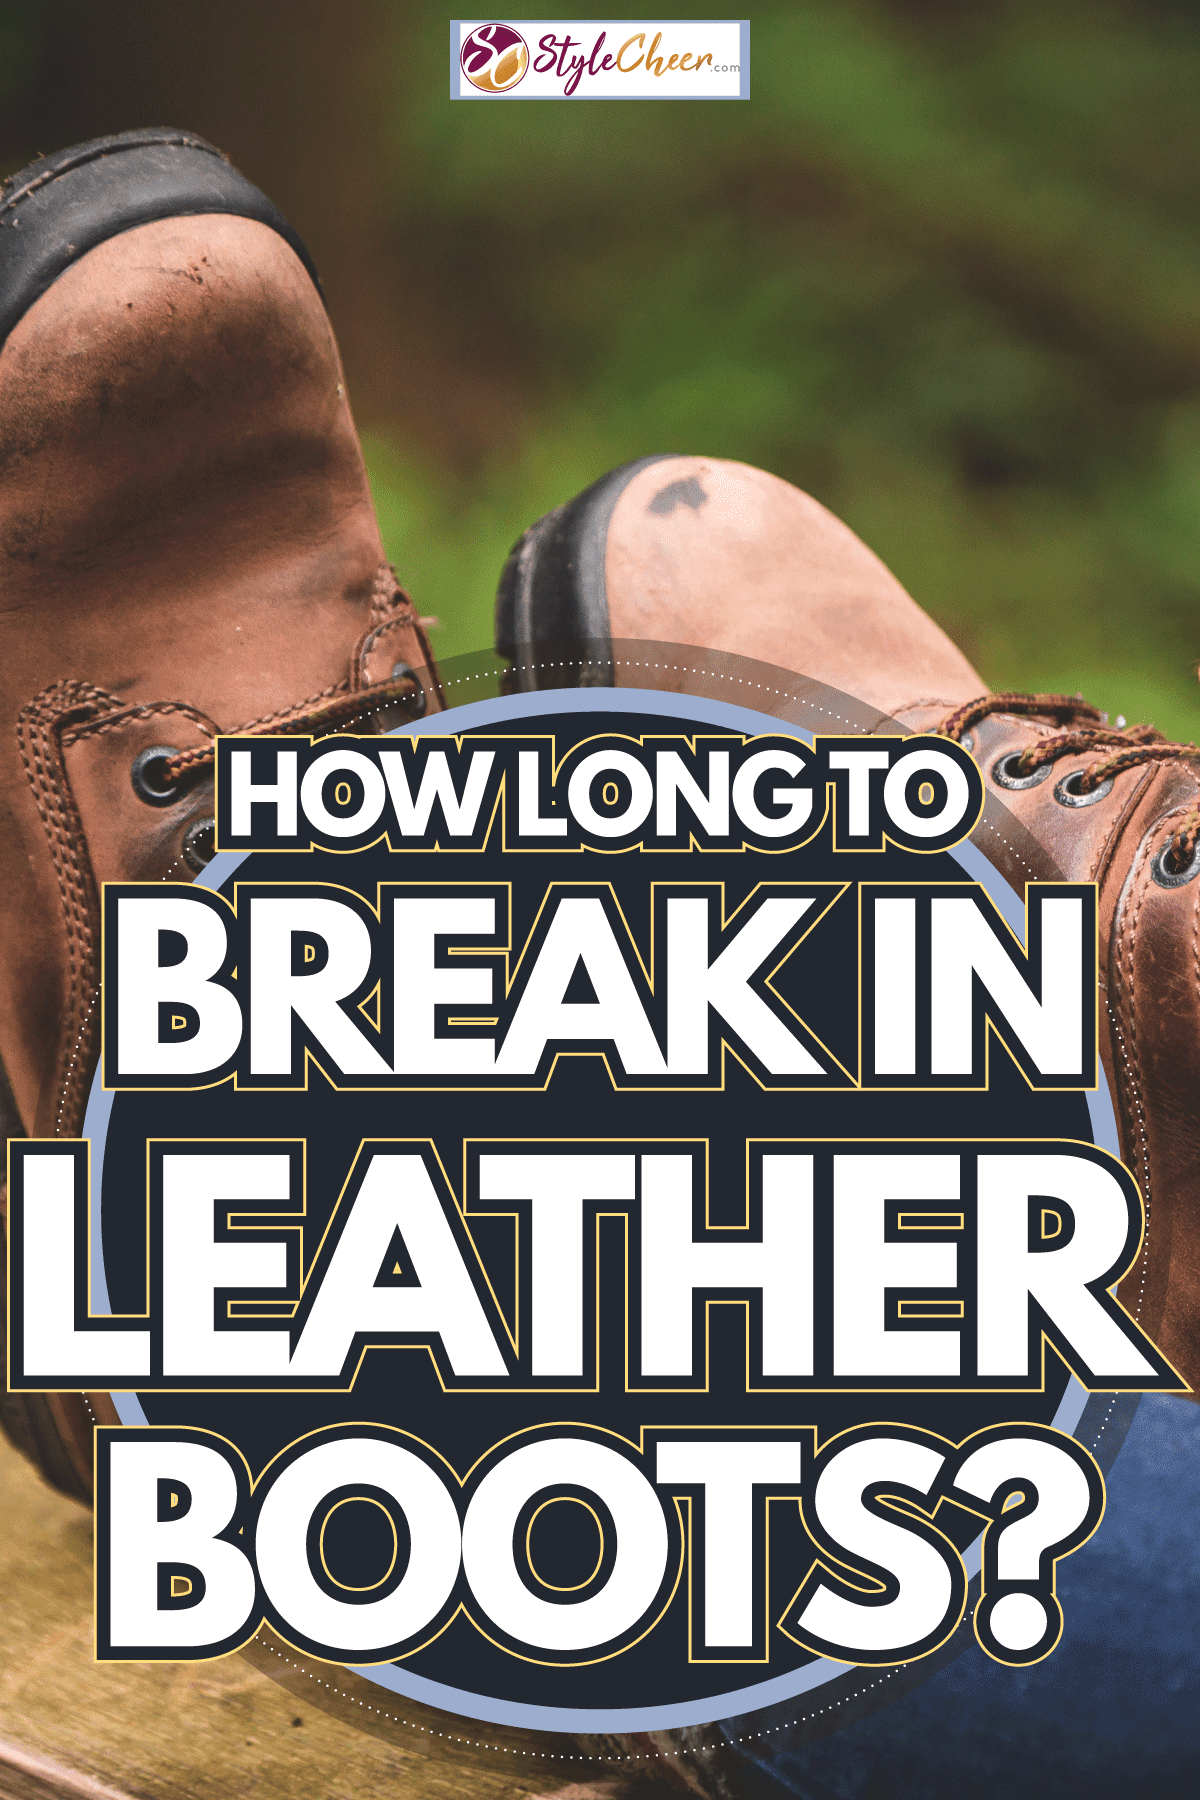 Leather boots used for hiking in a forest, How Long To Break In Leather Boots?